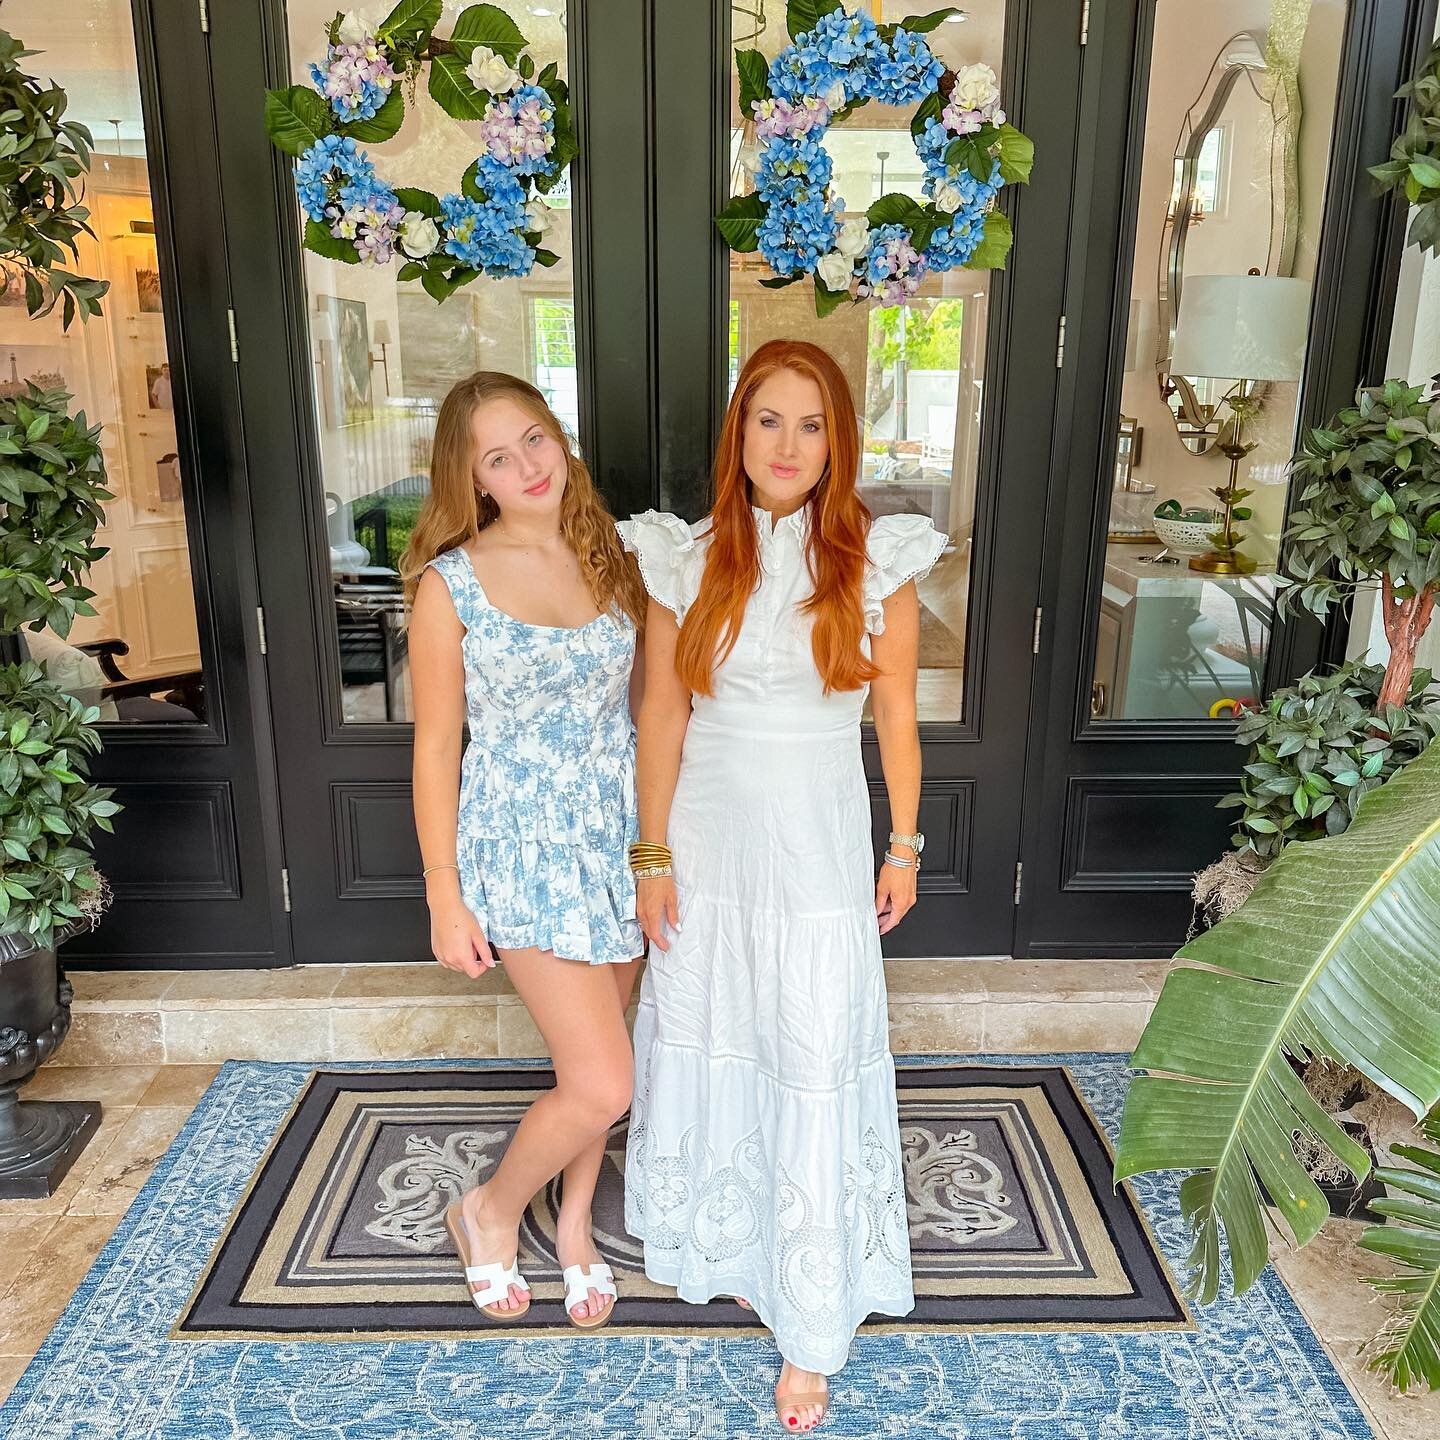 How is 𝑴𝒐𝒕𝒉𝒆𝒓&rsquo;𝒔 𝑫𝒂𝒚 this Sunday? Time is flying by!
Wanted to share some dress ideas for that special day. I found three pieces to match my daughter Addison. She is almost my height and we can pretty much share clothes. 💕

We choose 